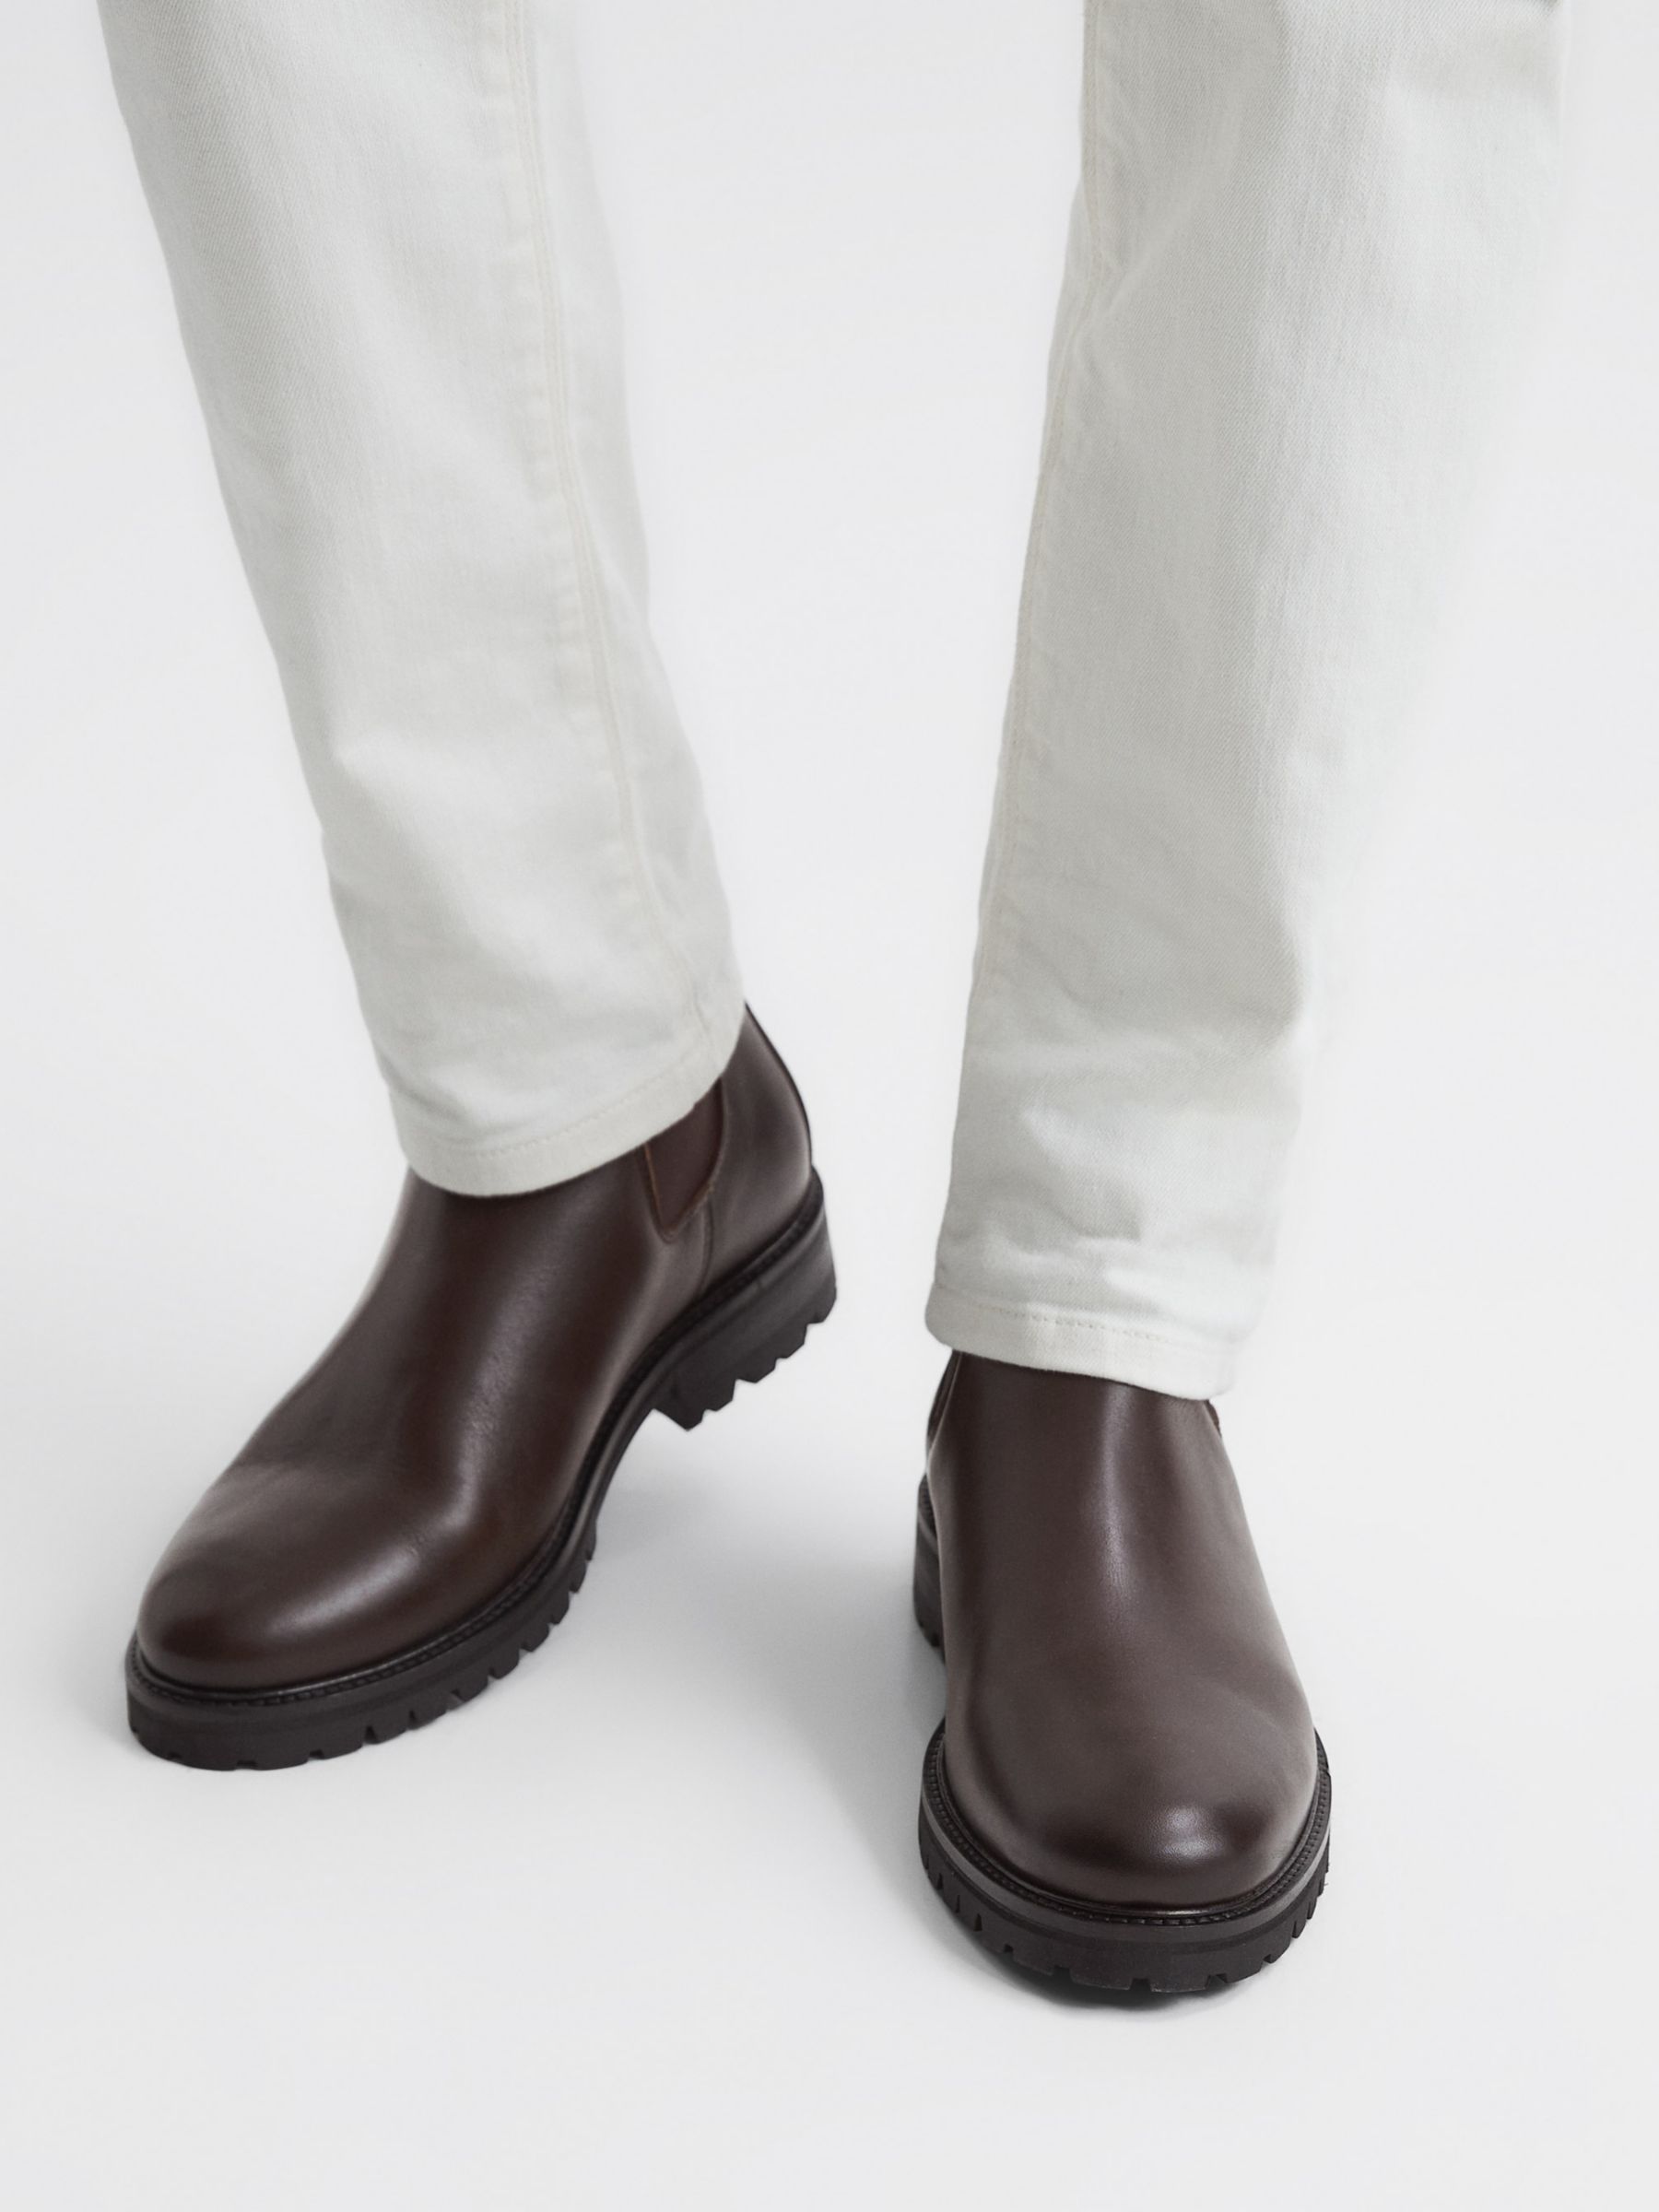 Reiss Chiltern Leather Chelsea Boots, Chocolate at John Lewis & Partners